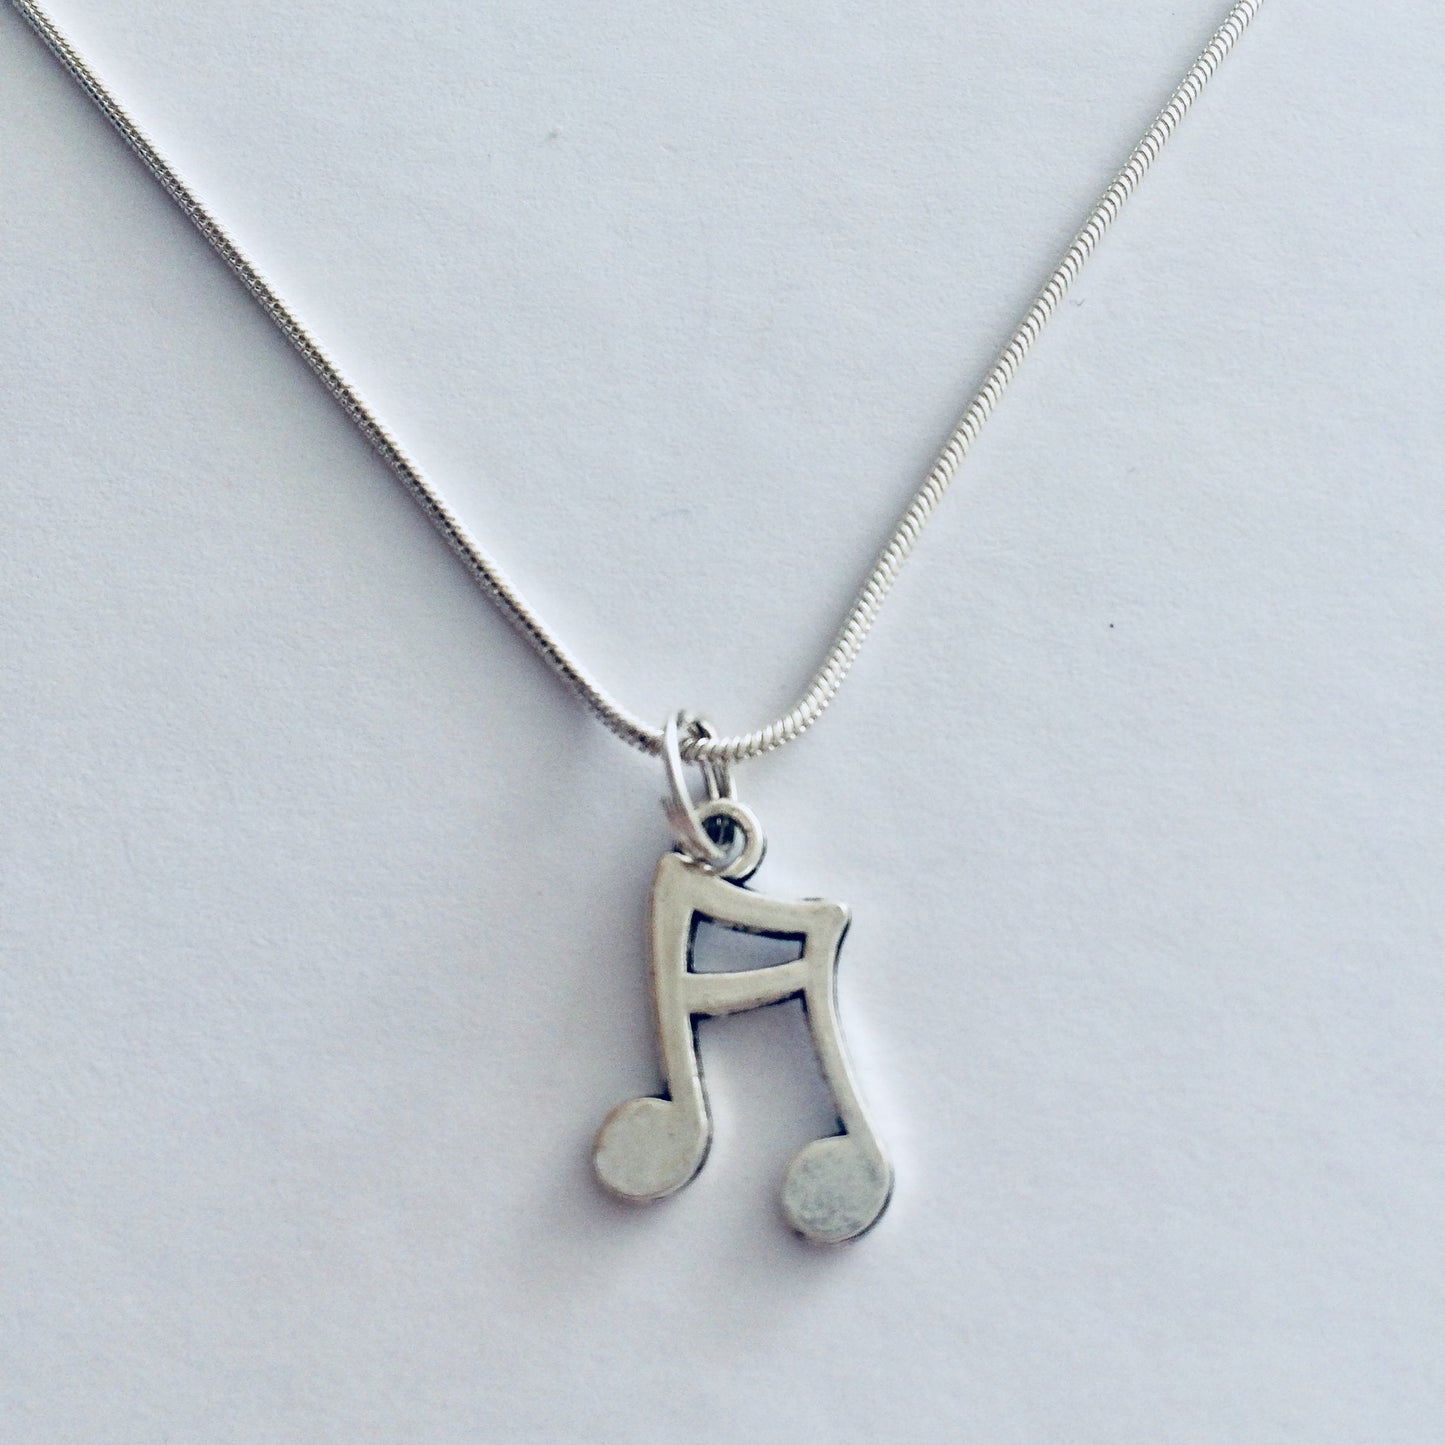 Music Note Necklace, Music Jewelry, Music Lover Gifts, Music Jewellery, Musician Gift Idea, Conductor Gift, Steel Band, Songsheet Gifts.